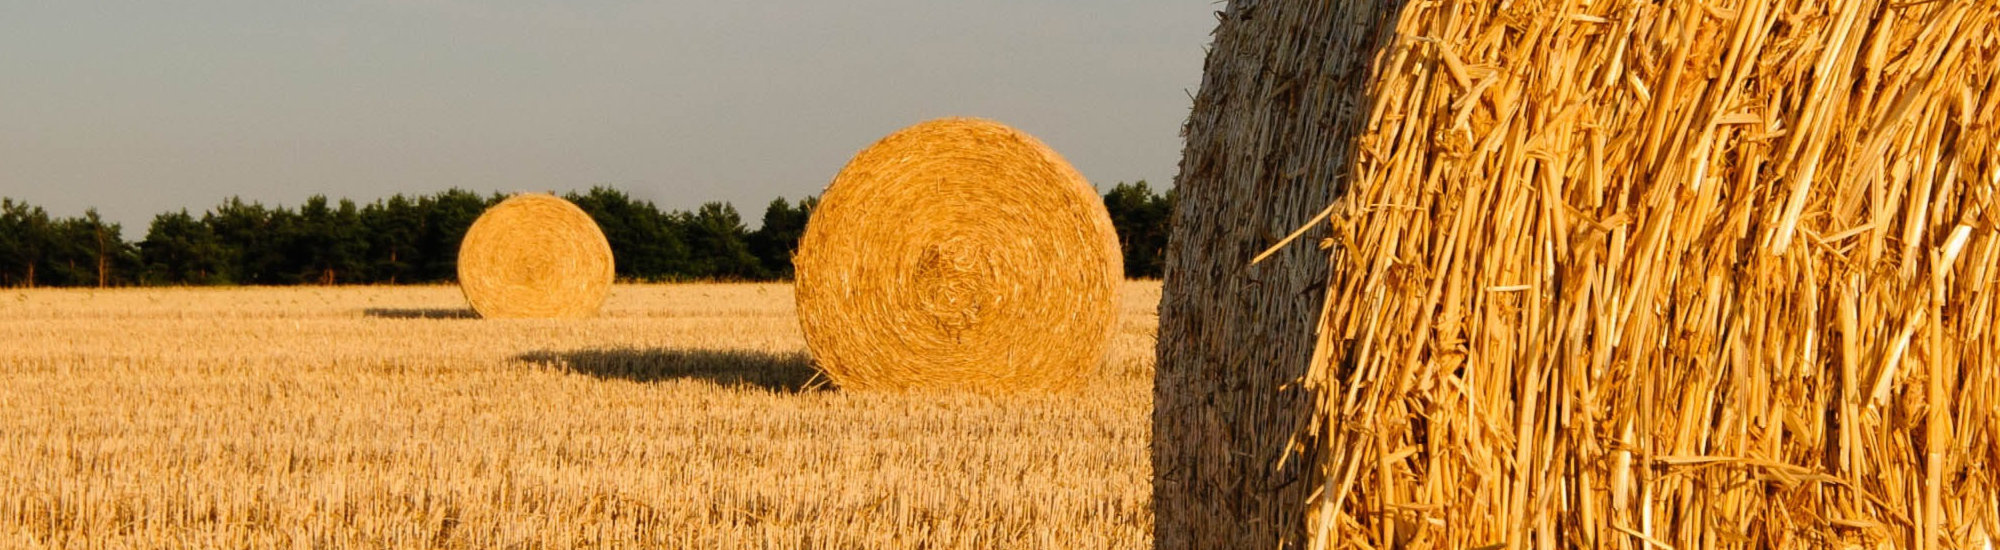 A harvested field with three large hay bales